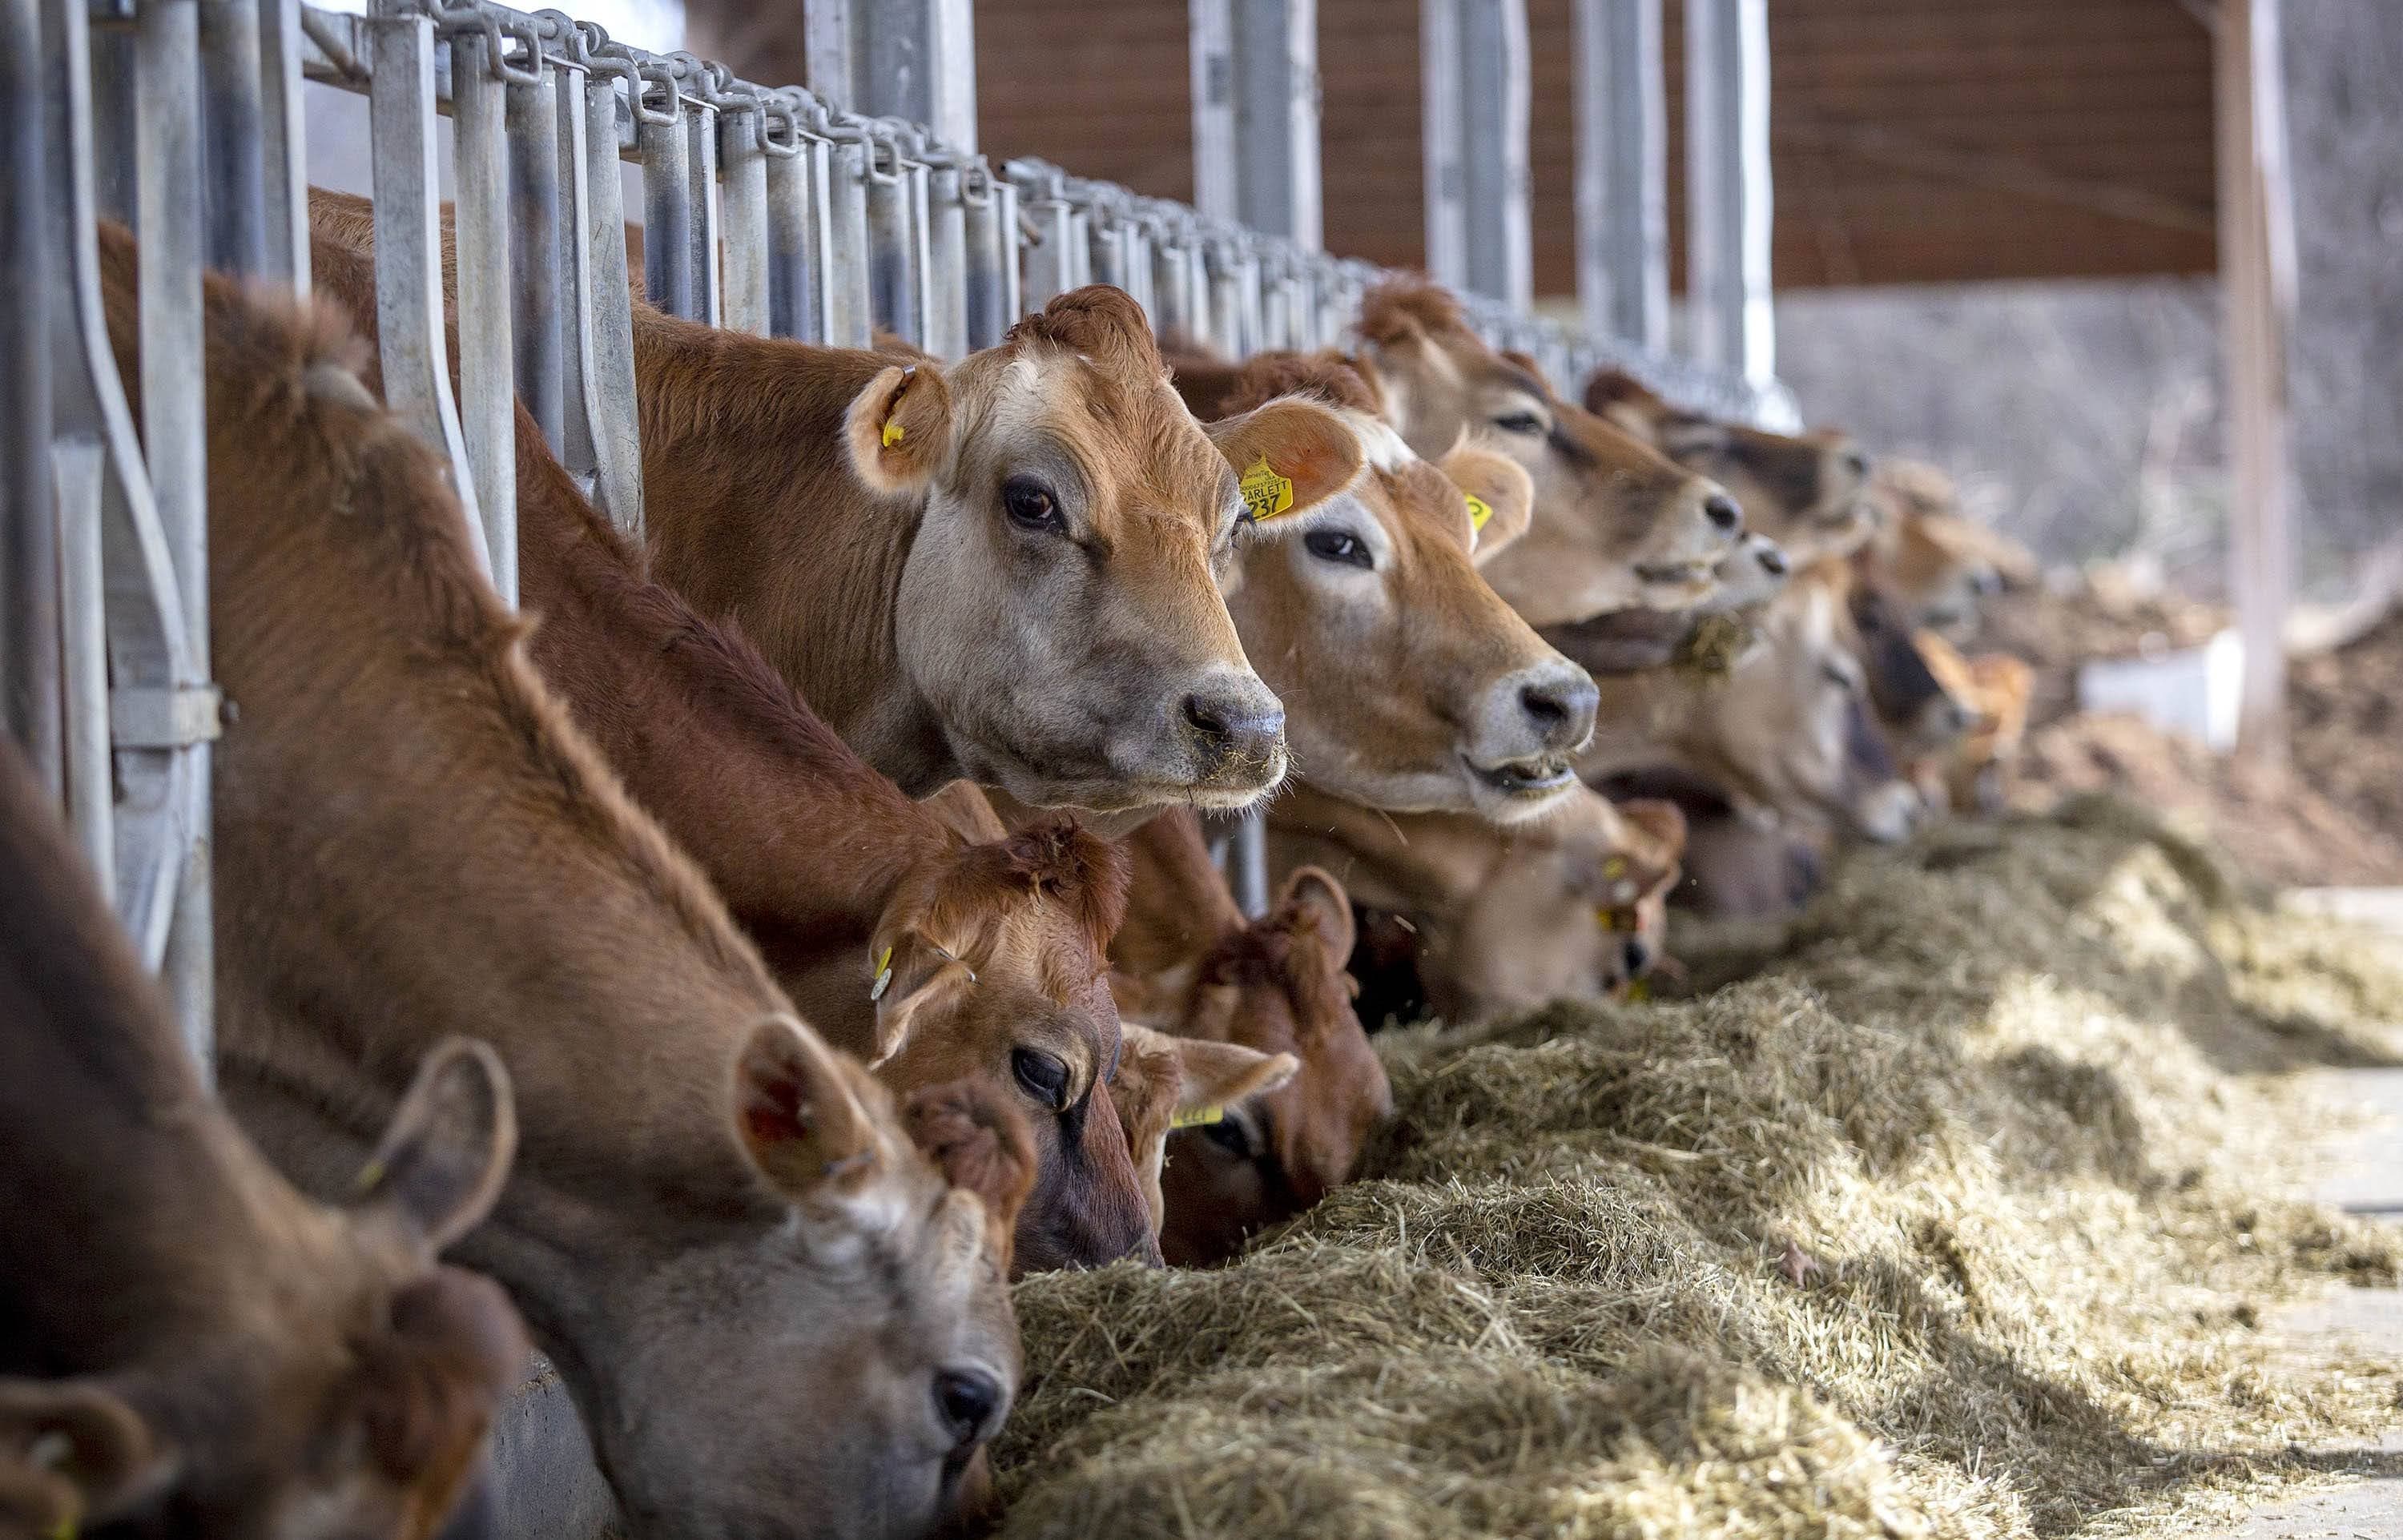 Cows lined up for feeding at Burley-Demeritt Organic Dairy Research Farm in New Hampshire. (Robin Lubbock/WBUR)